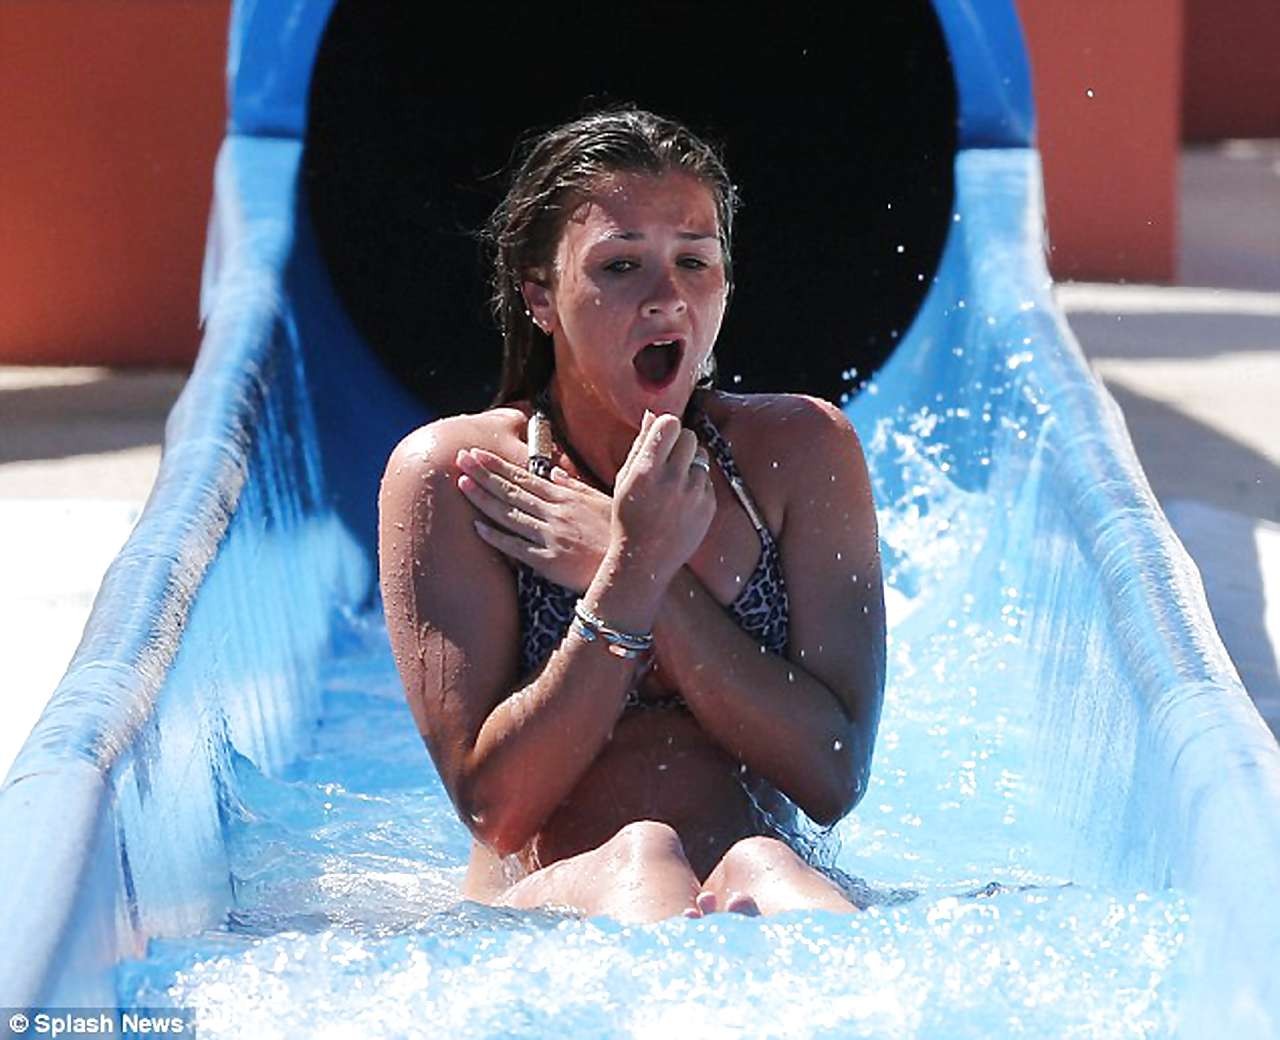 Brooke Vincent looking very hot and sexy in bikini on pool #75229010